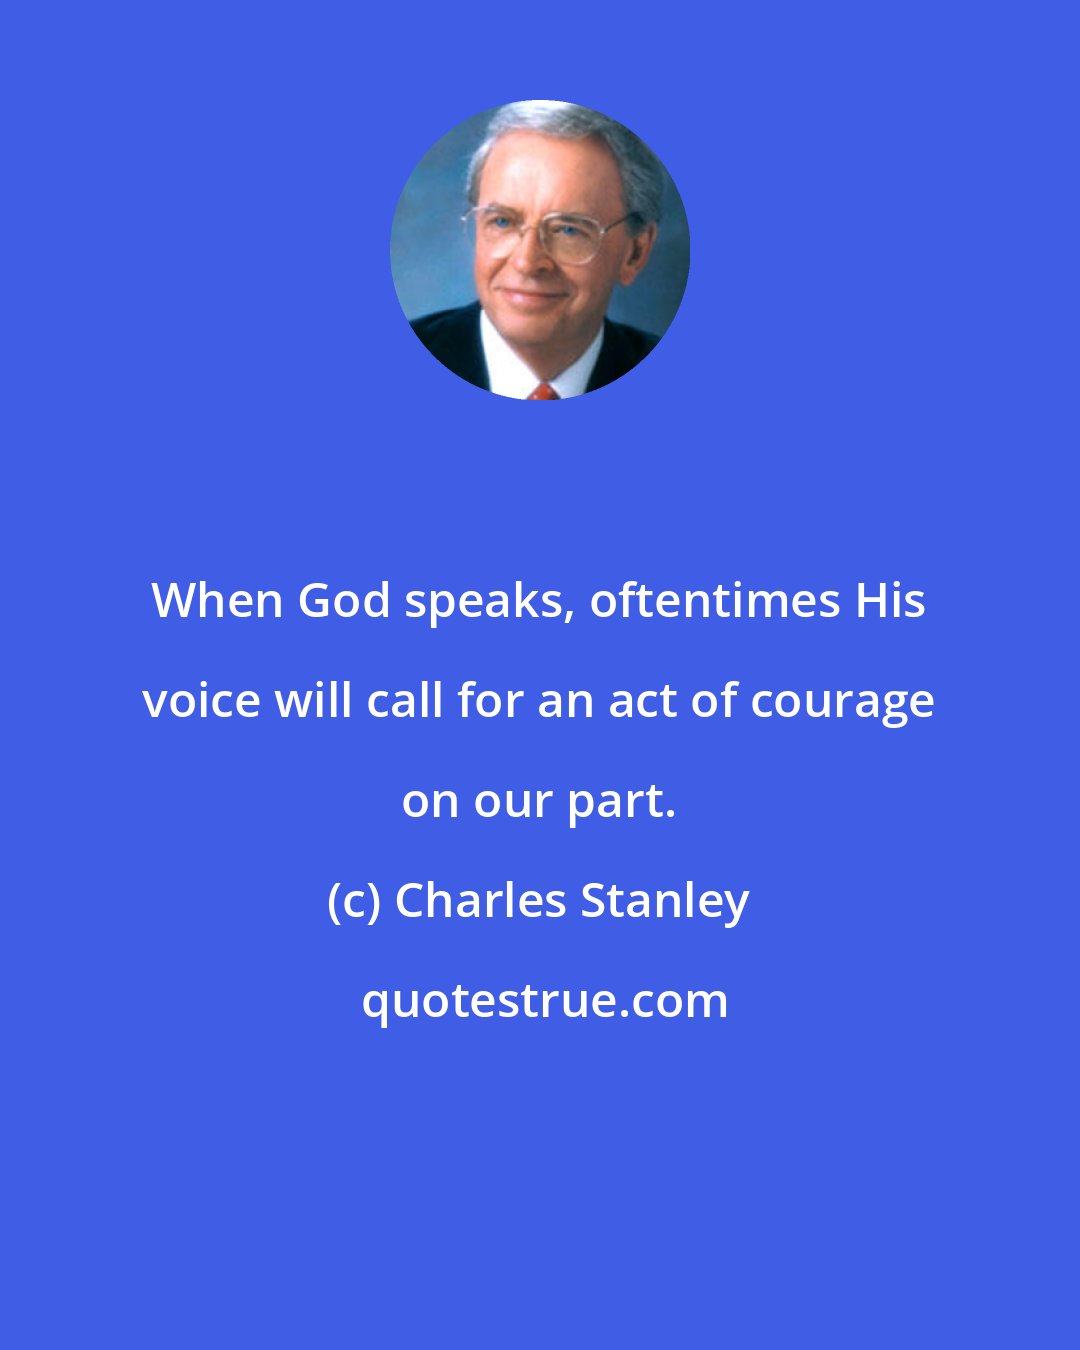 Charles Stanley: When God speaks, oftentimes His voice will call for an act of courage on our part.